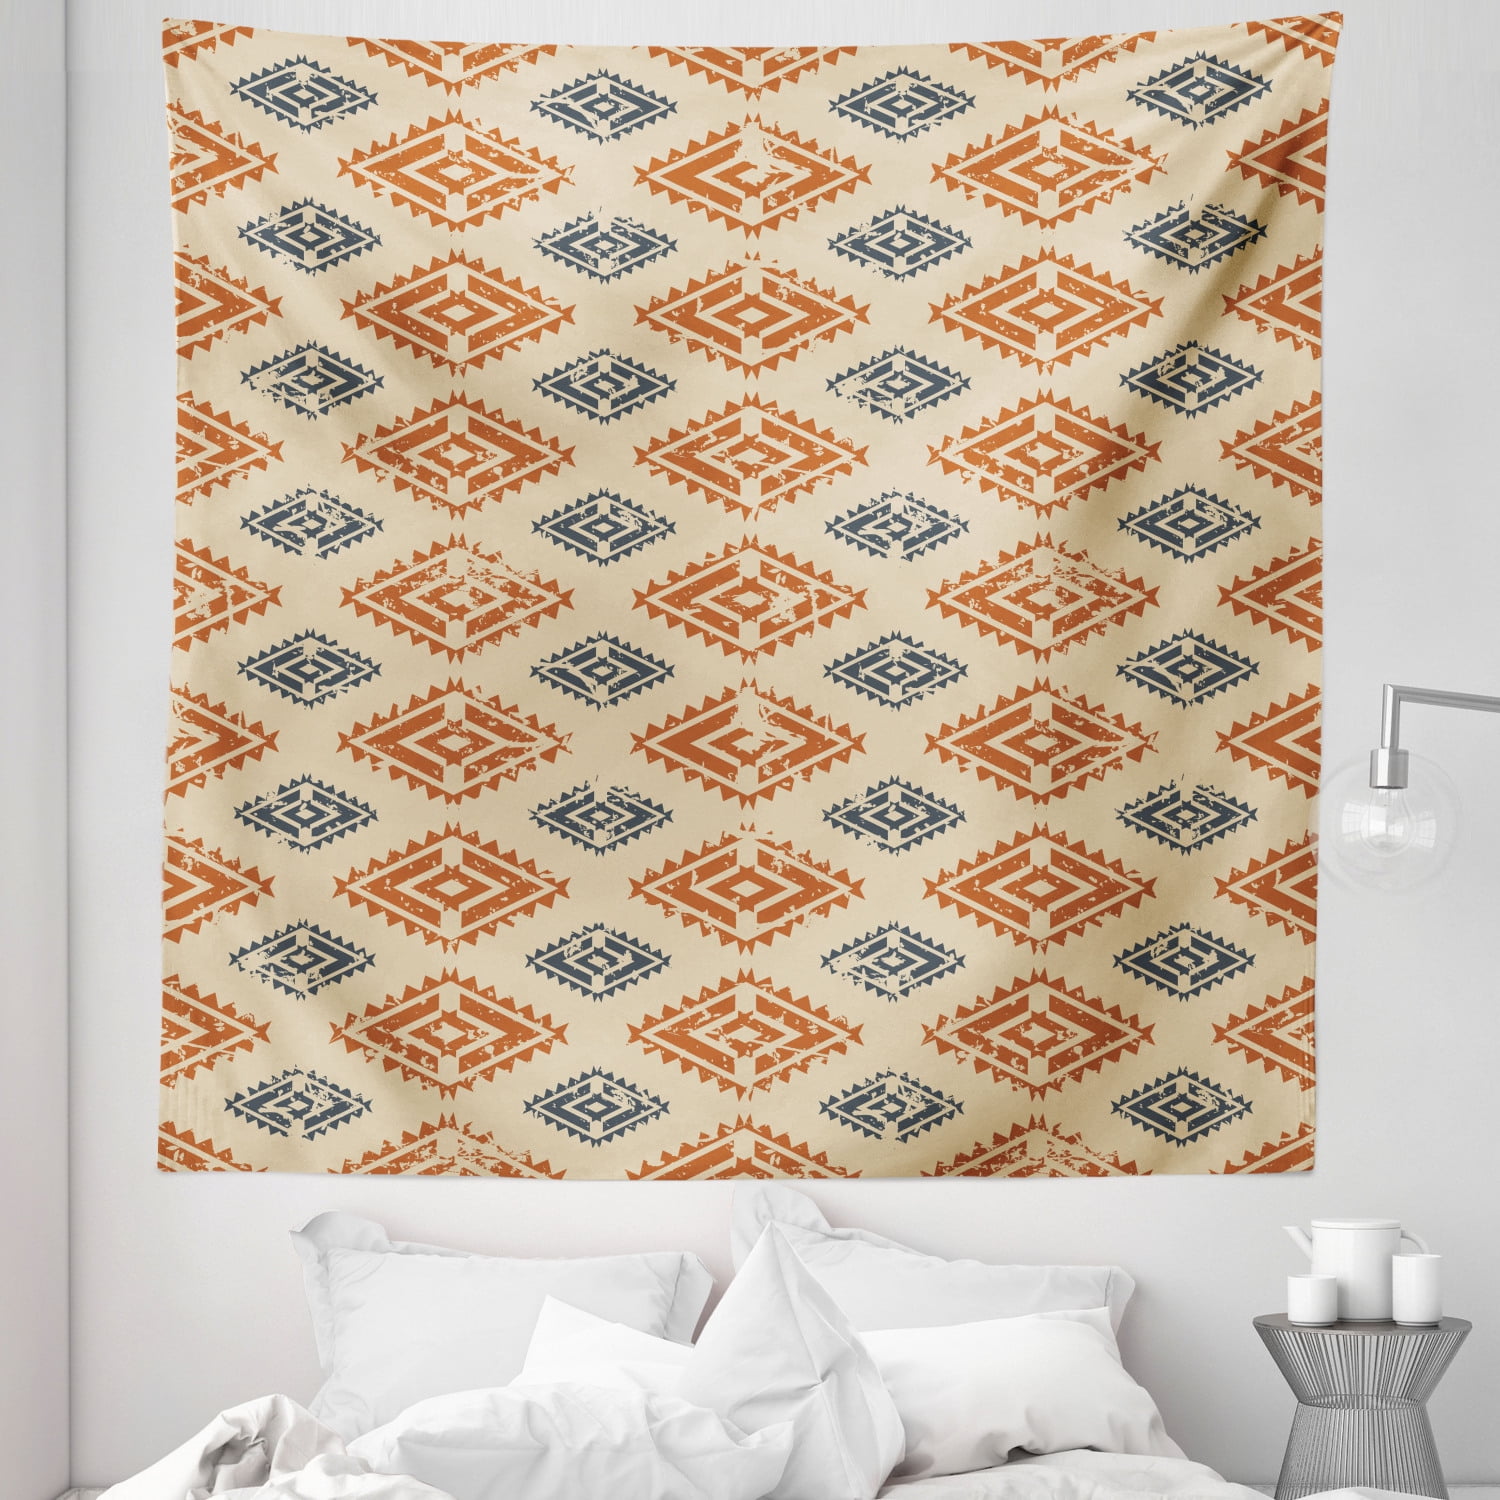 Zambia Tapestry, Folk Design with Retro Style Effects in Pastel Print,  Fabric Wall Hanging Decor for Bedroom Living Room Dorm, Sizes, Sand  Orange Dark Blue, by Ambesonne